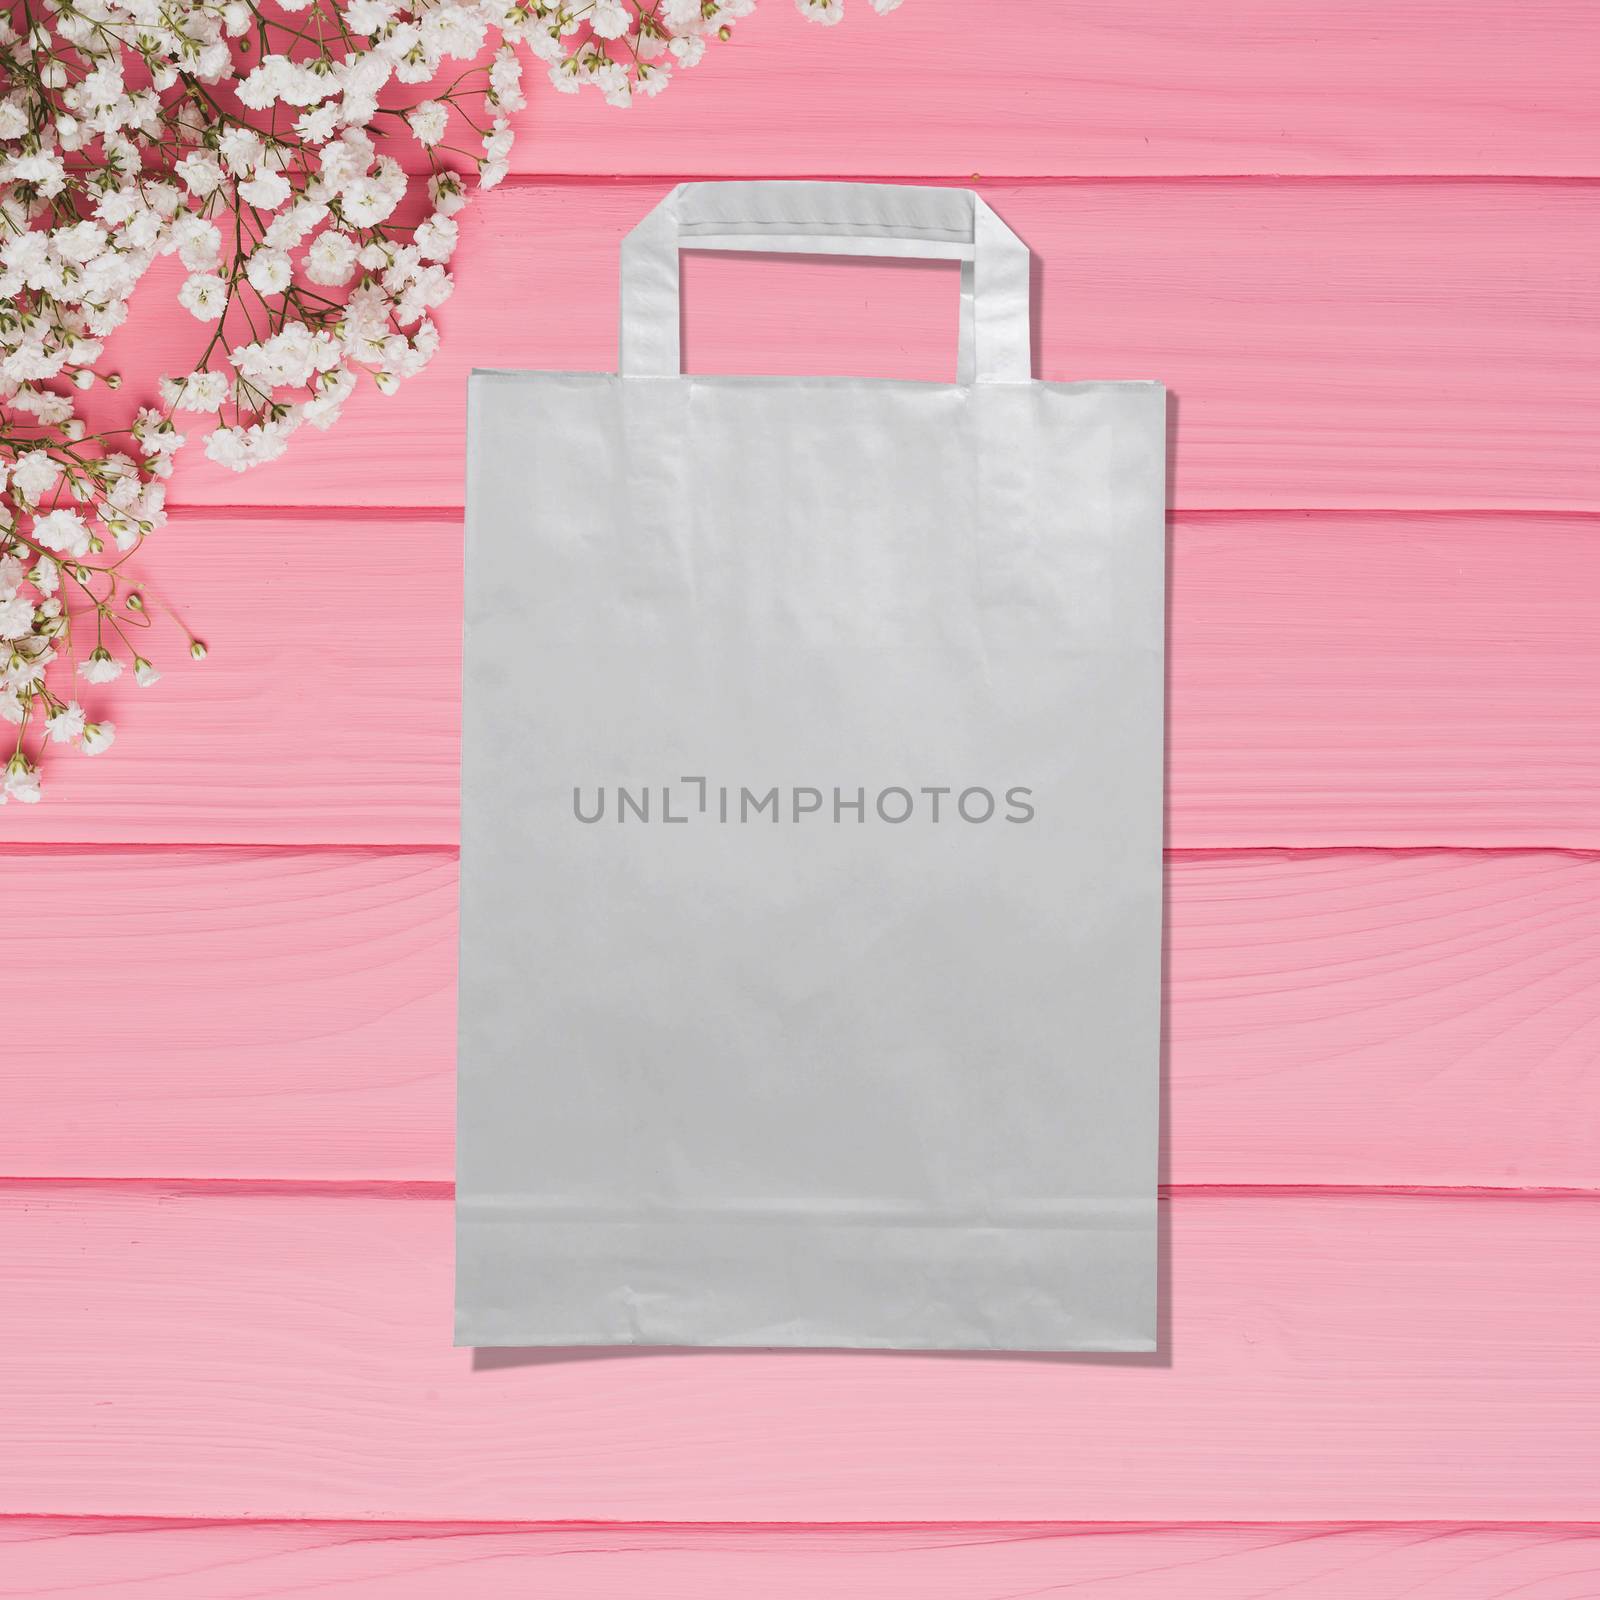 light poly bag for shopping on a pink background